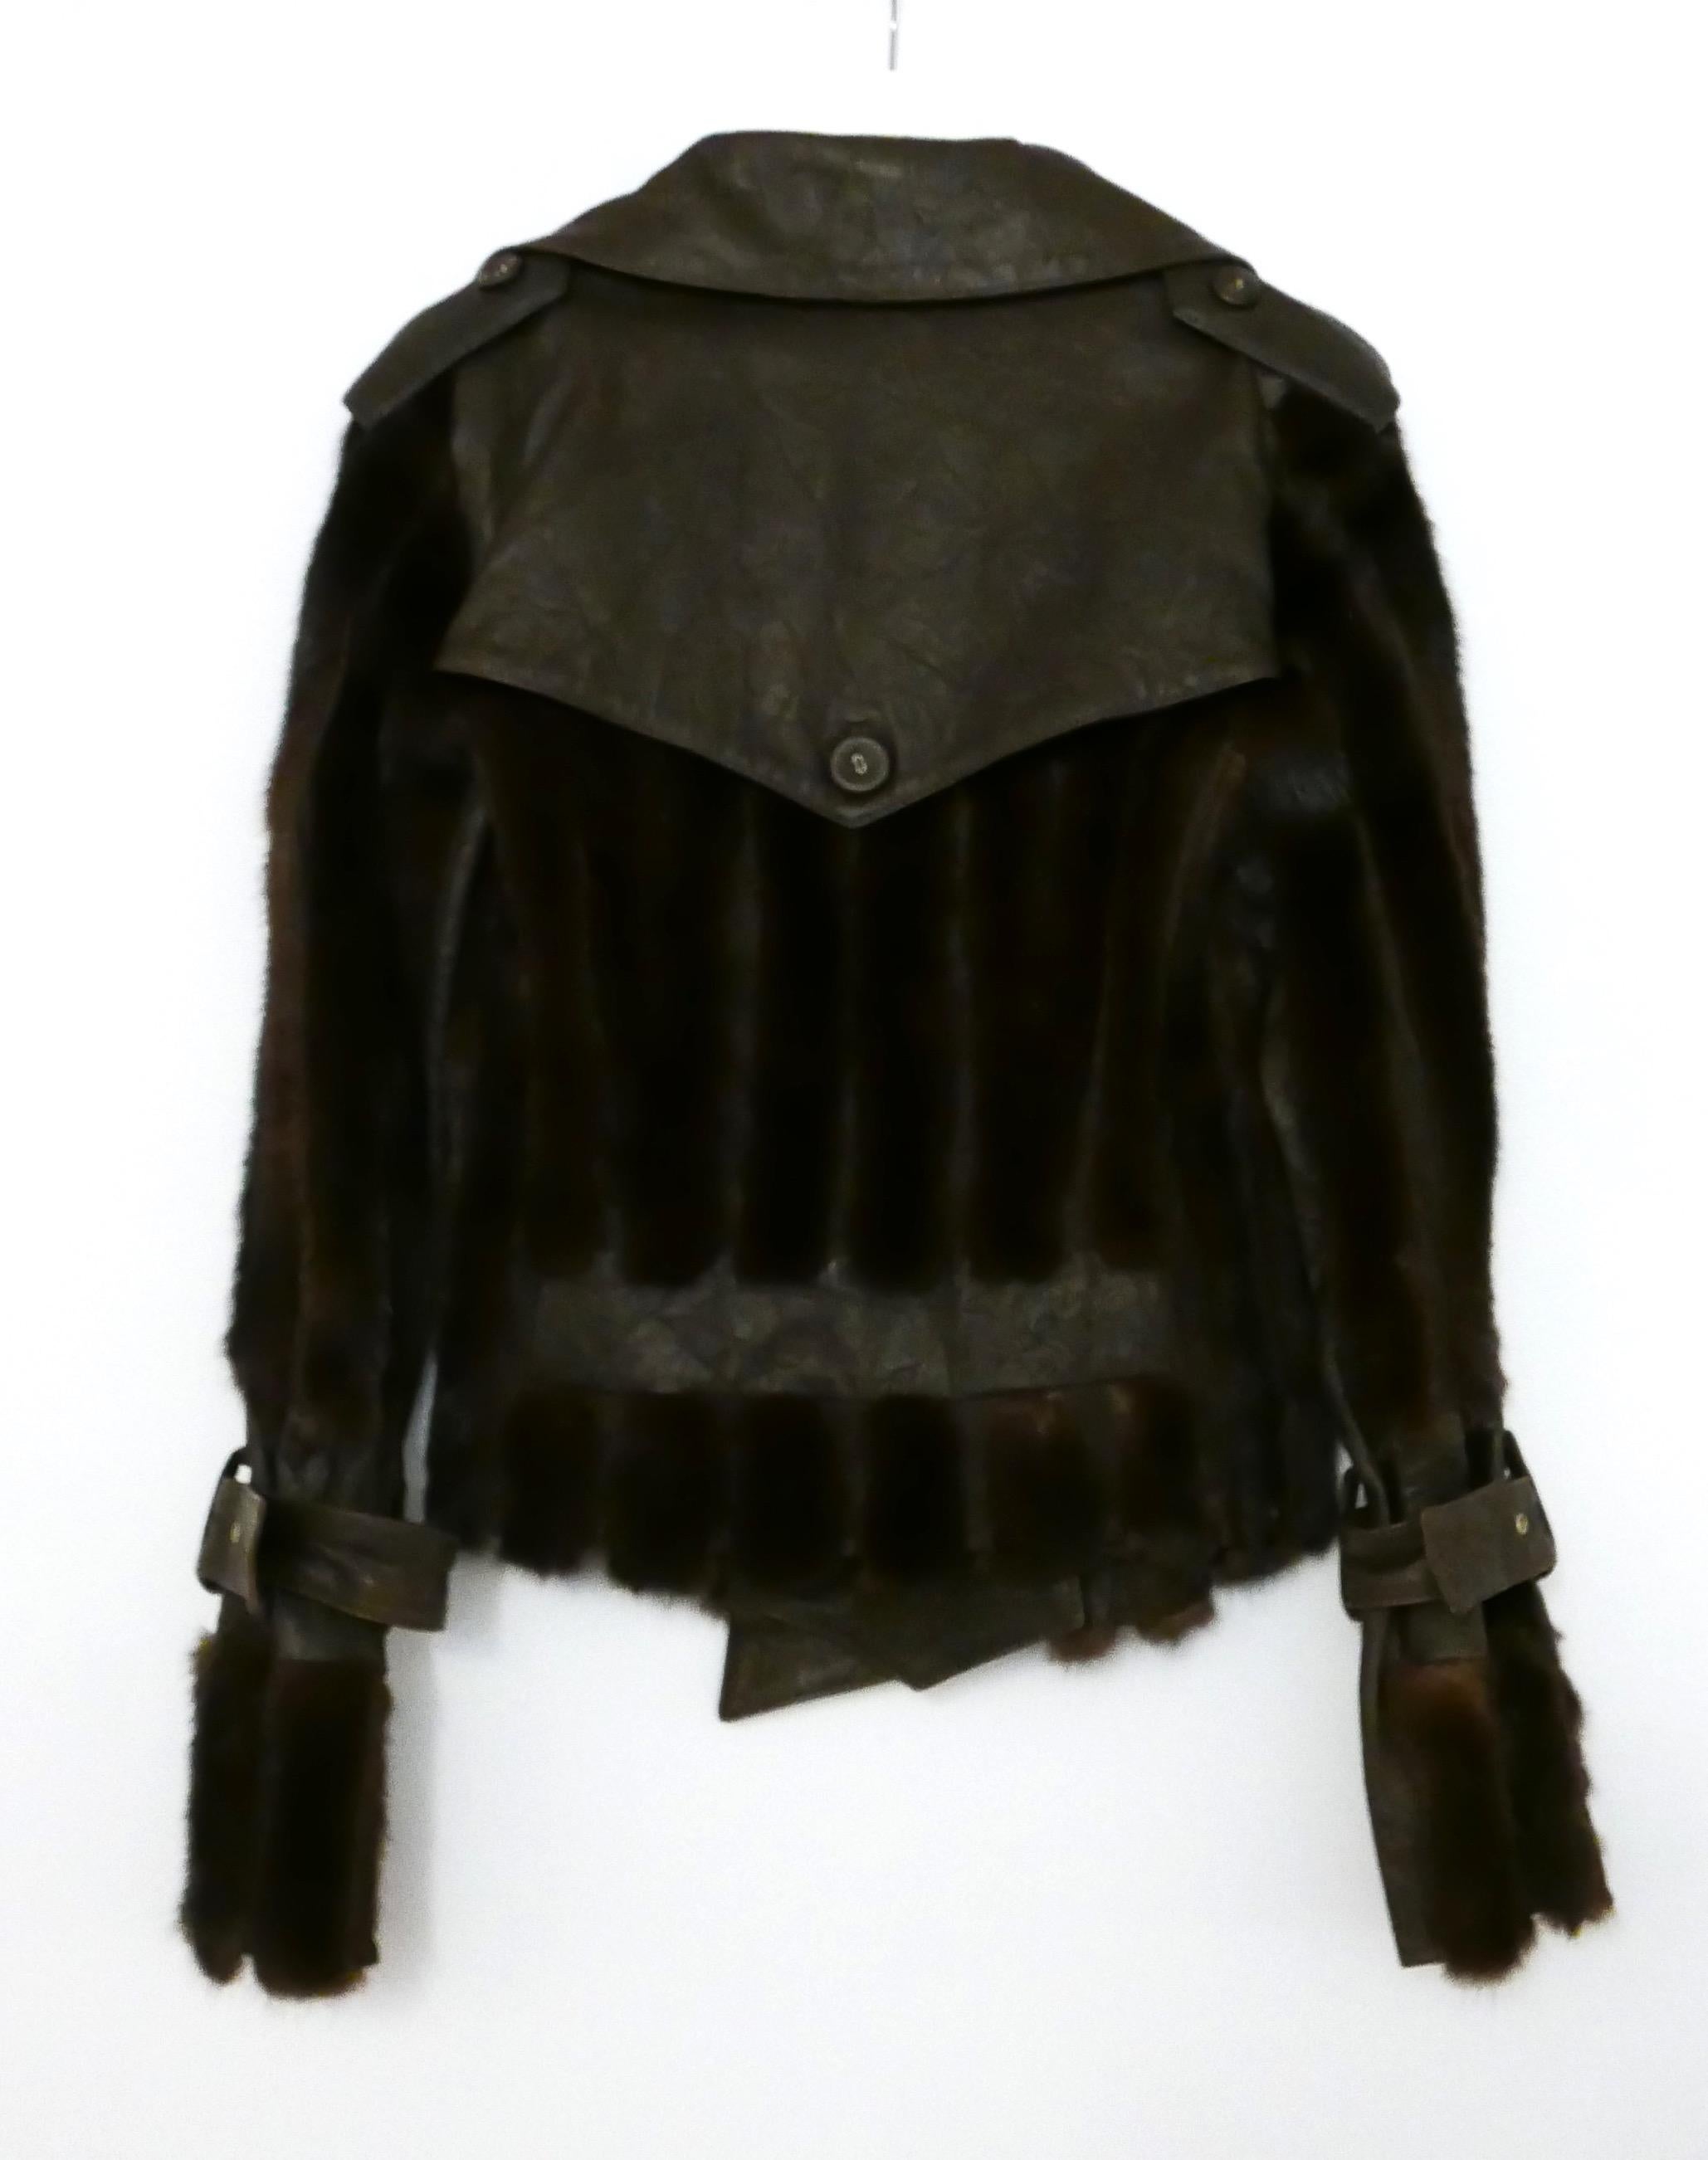 Christian Dior x Galliano 2006 Brown Mink, Leather & Tulle Biker Jacket For Sale 3